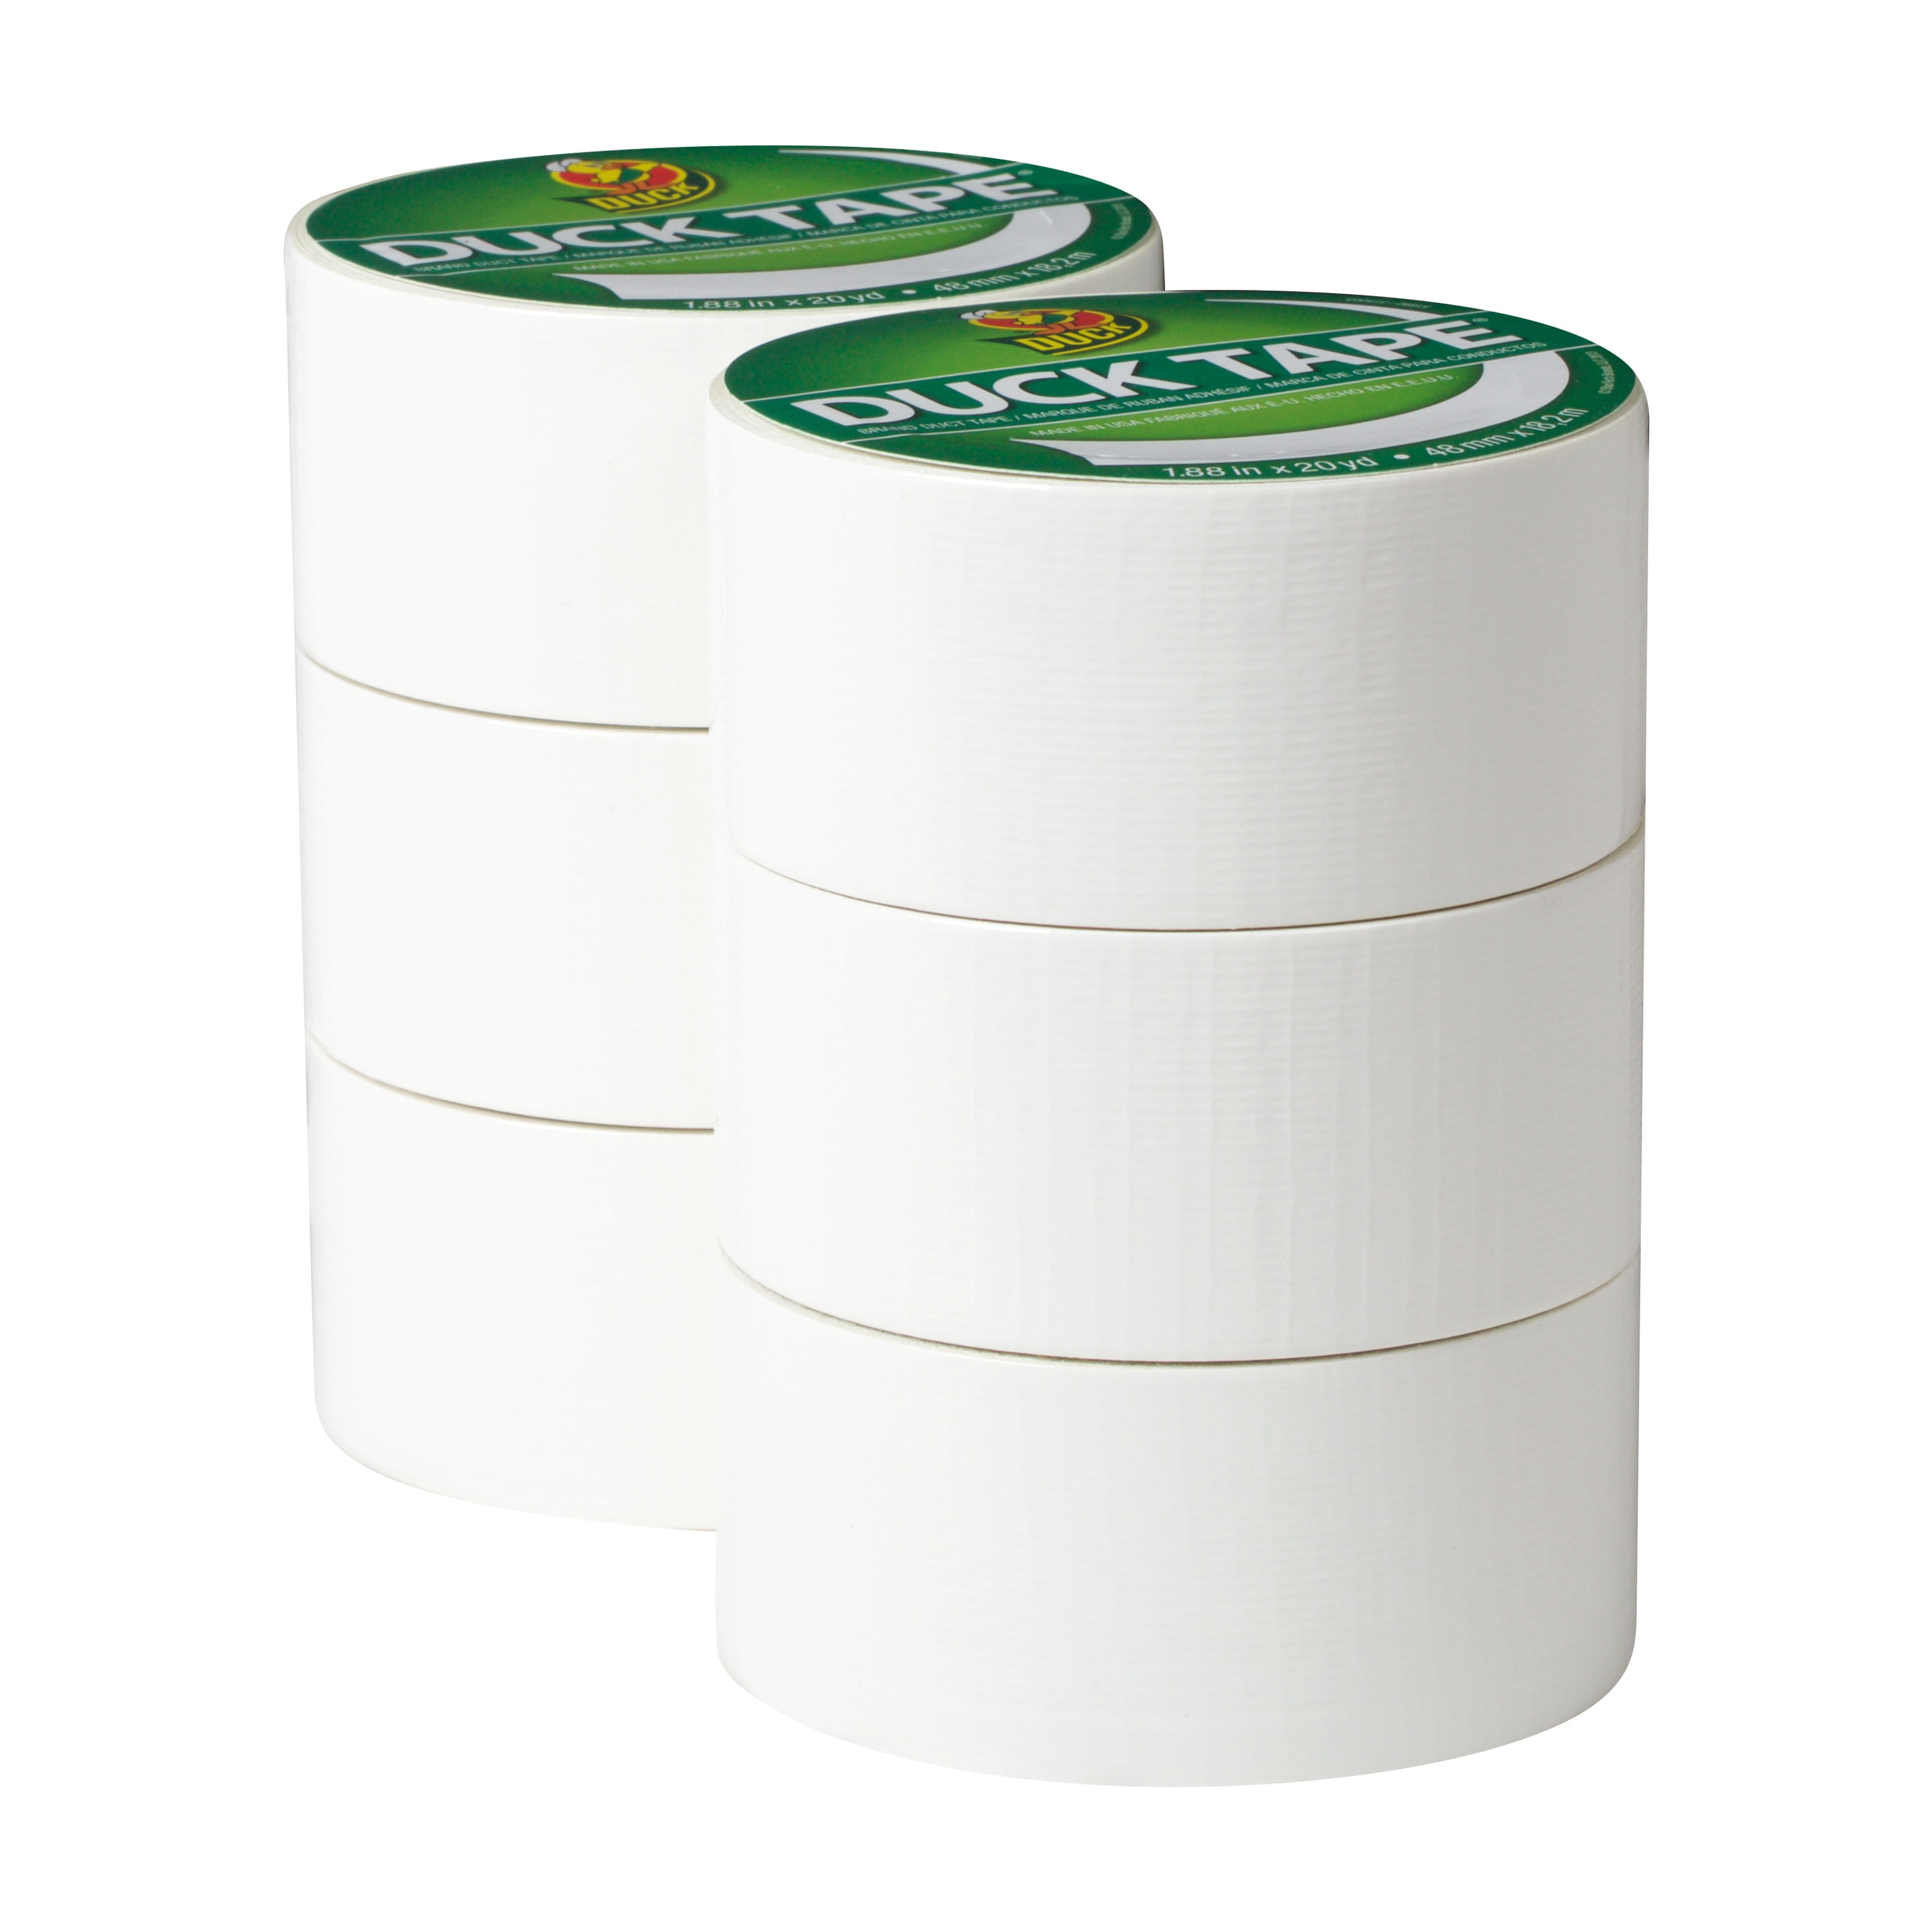 Duck Brand 1.88 in x 20 yd. White Colored Duct Tape, 6 Pack, Size: 1.88 Inches x 20 Yards